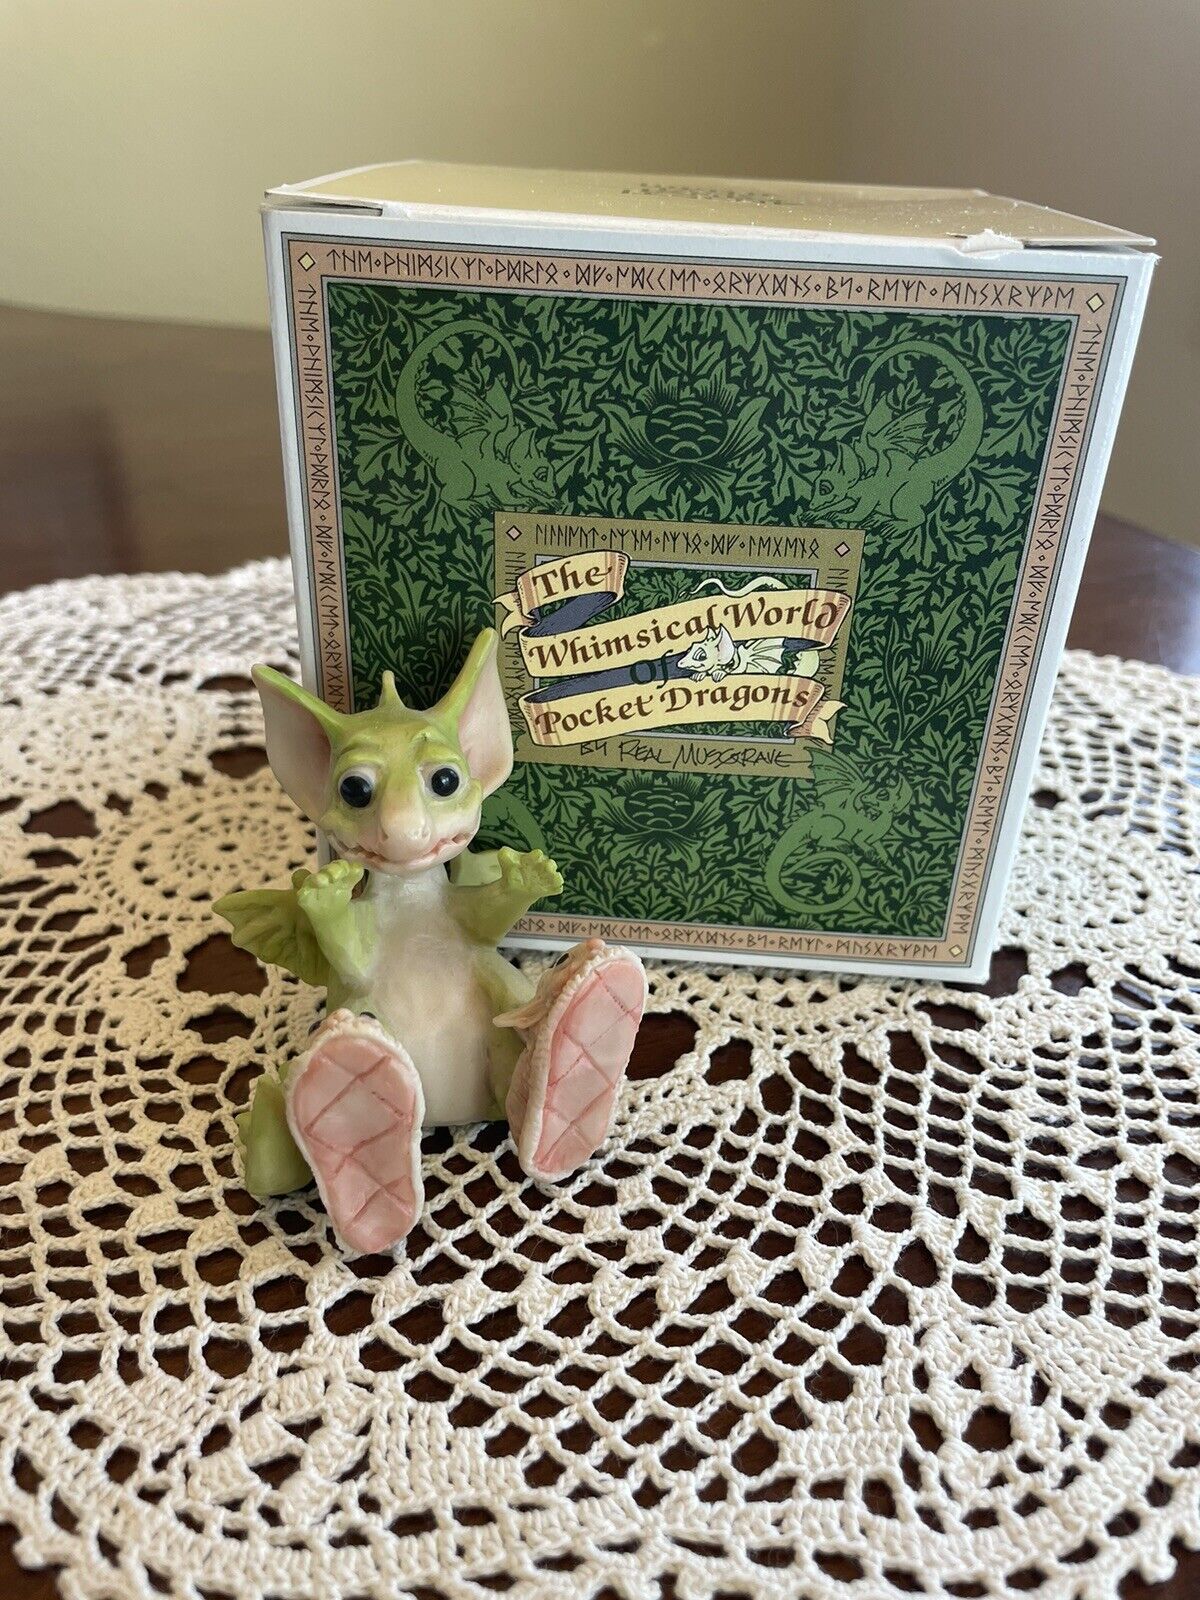 1989 Whimsical World of Pocket Dragons by Real Musgrave ~ New Bunny Shoes ~